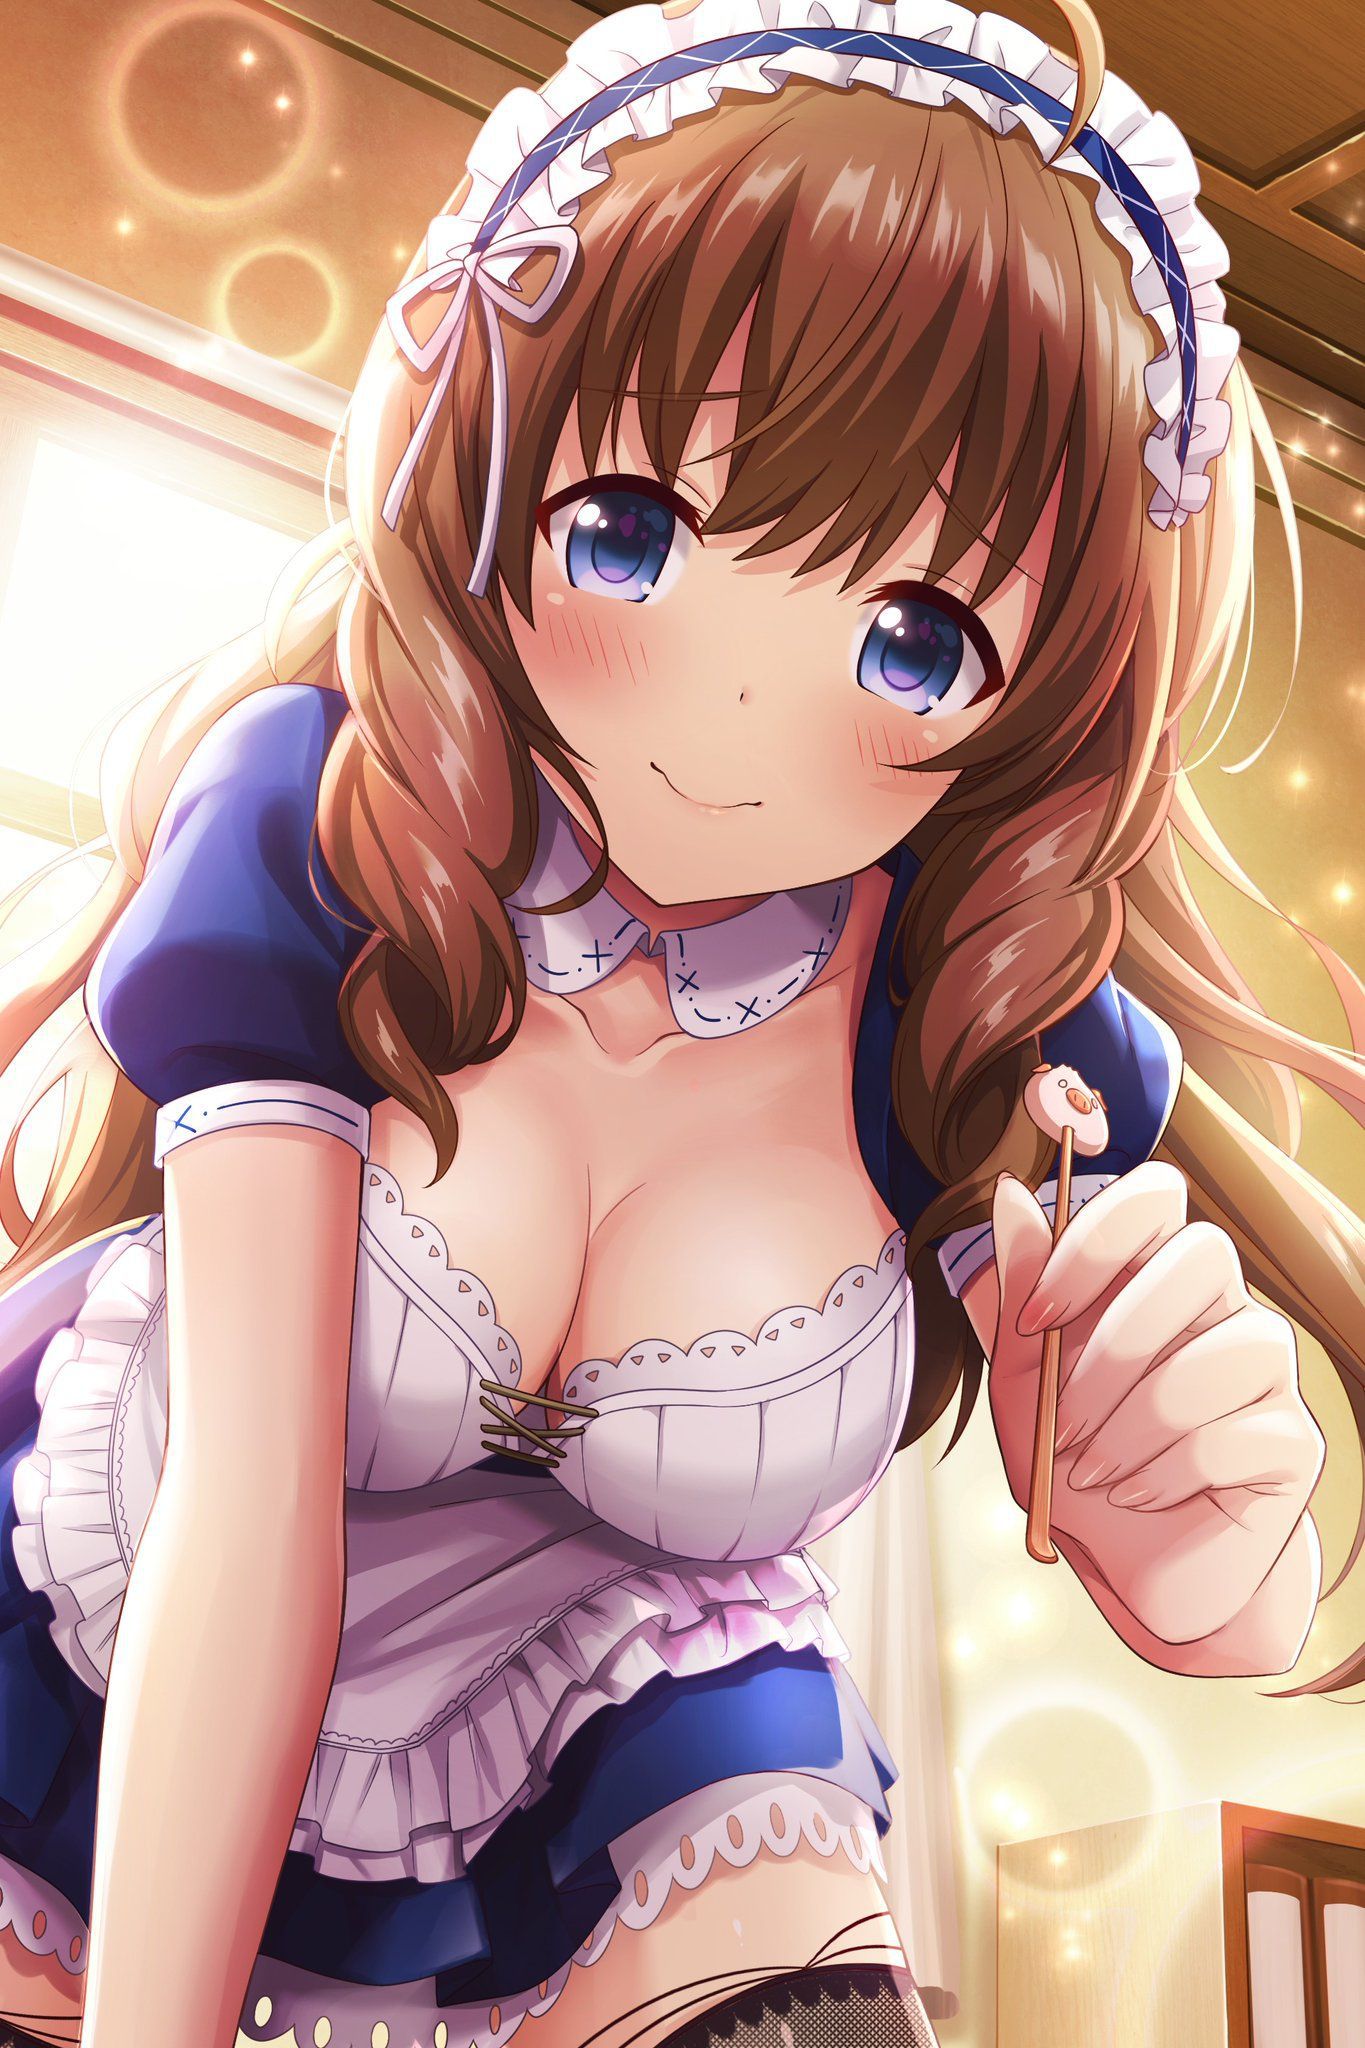 [Secondary ZIP] The second image of the maid wants you to serve naughty Girl 39